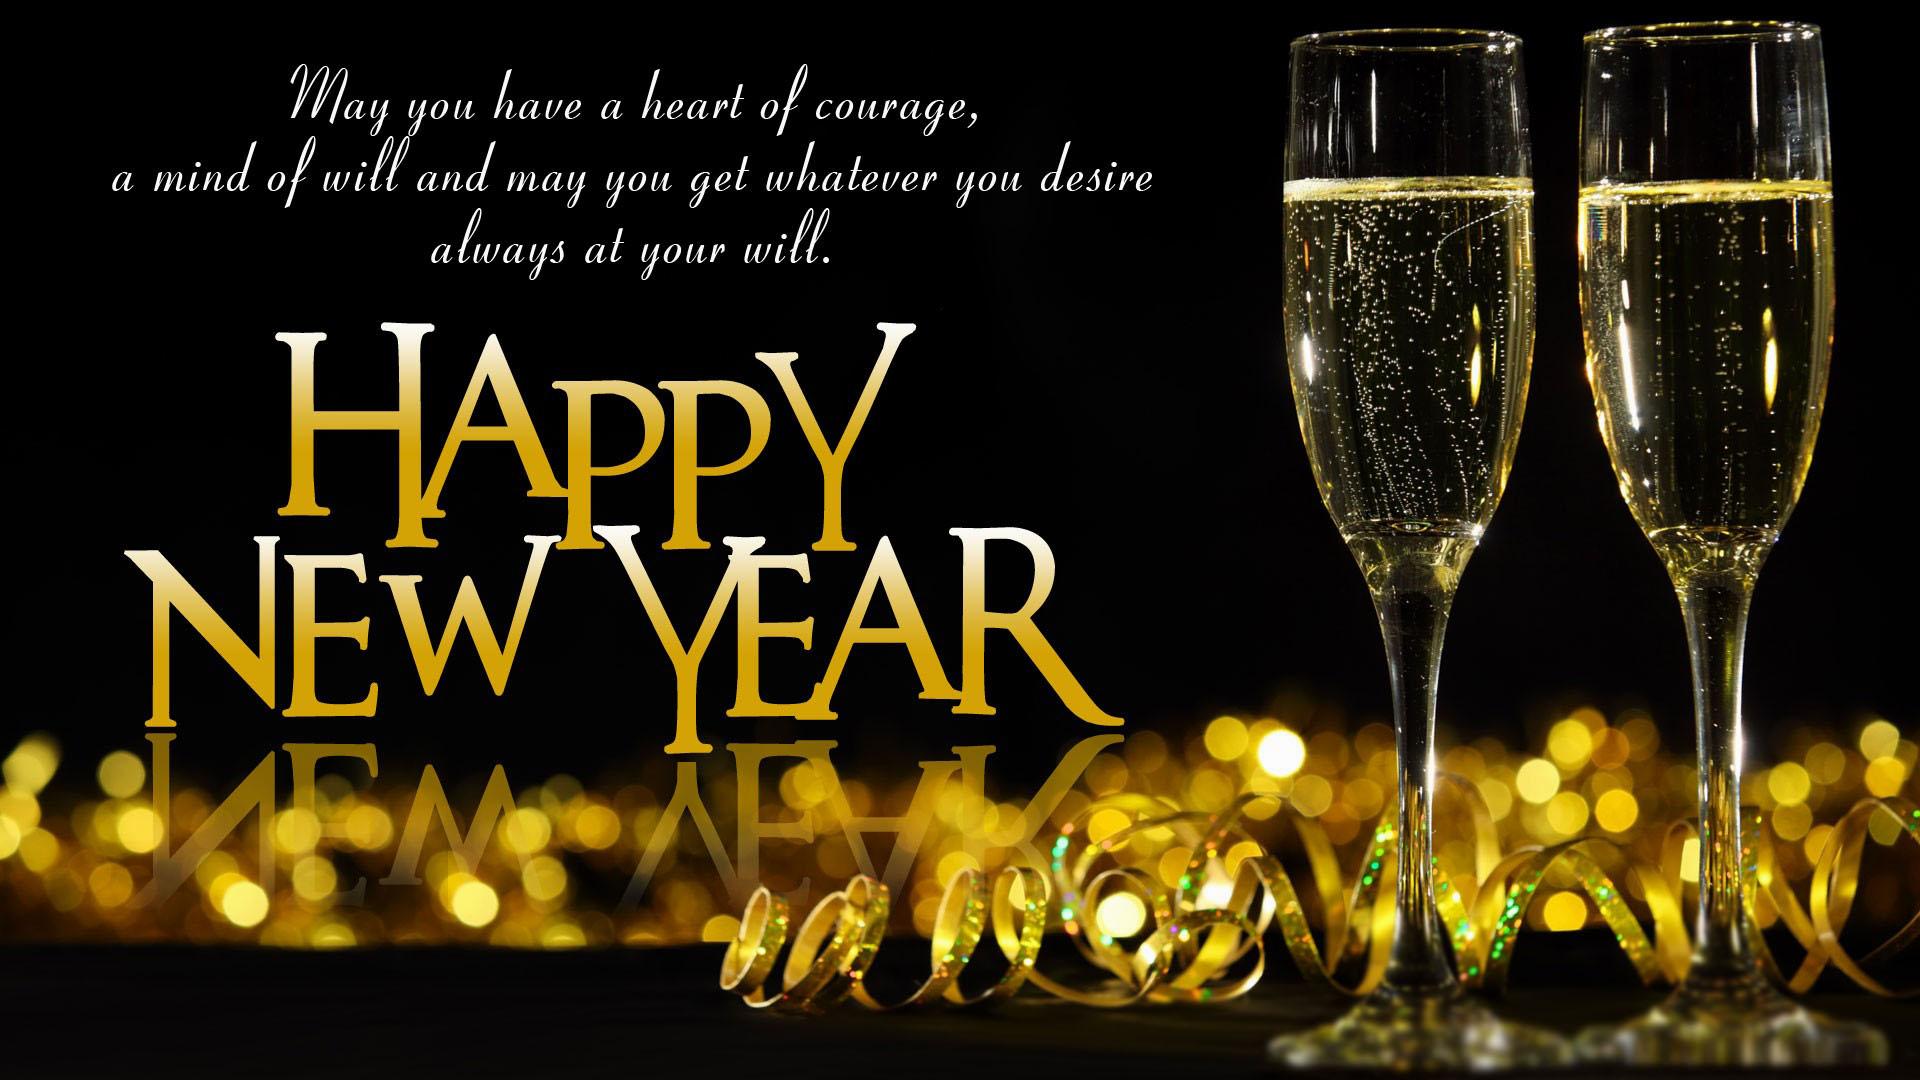 31 Dec 2023 Happy New Year Eve Wishes, SMS Messages Quotes Whatsapp